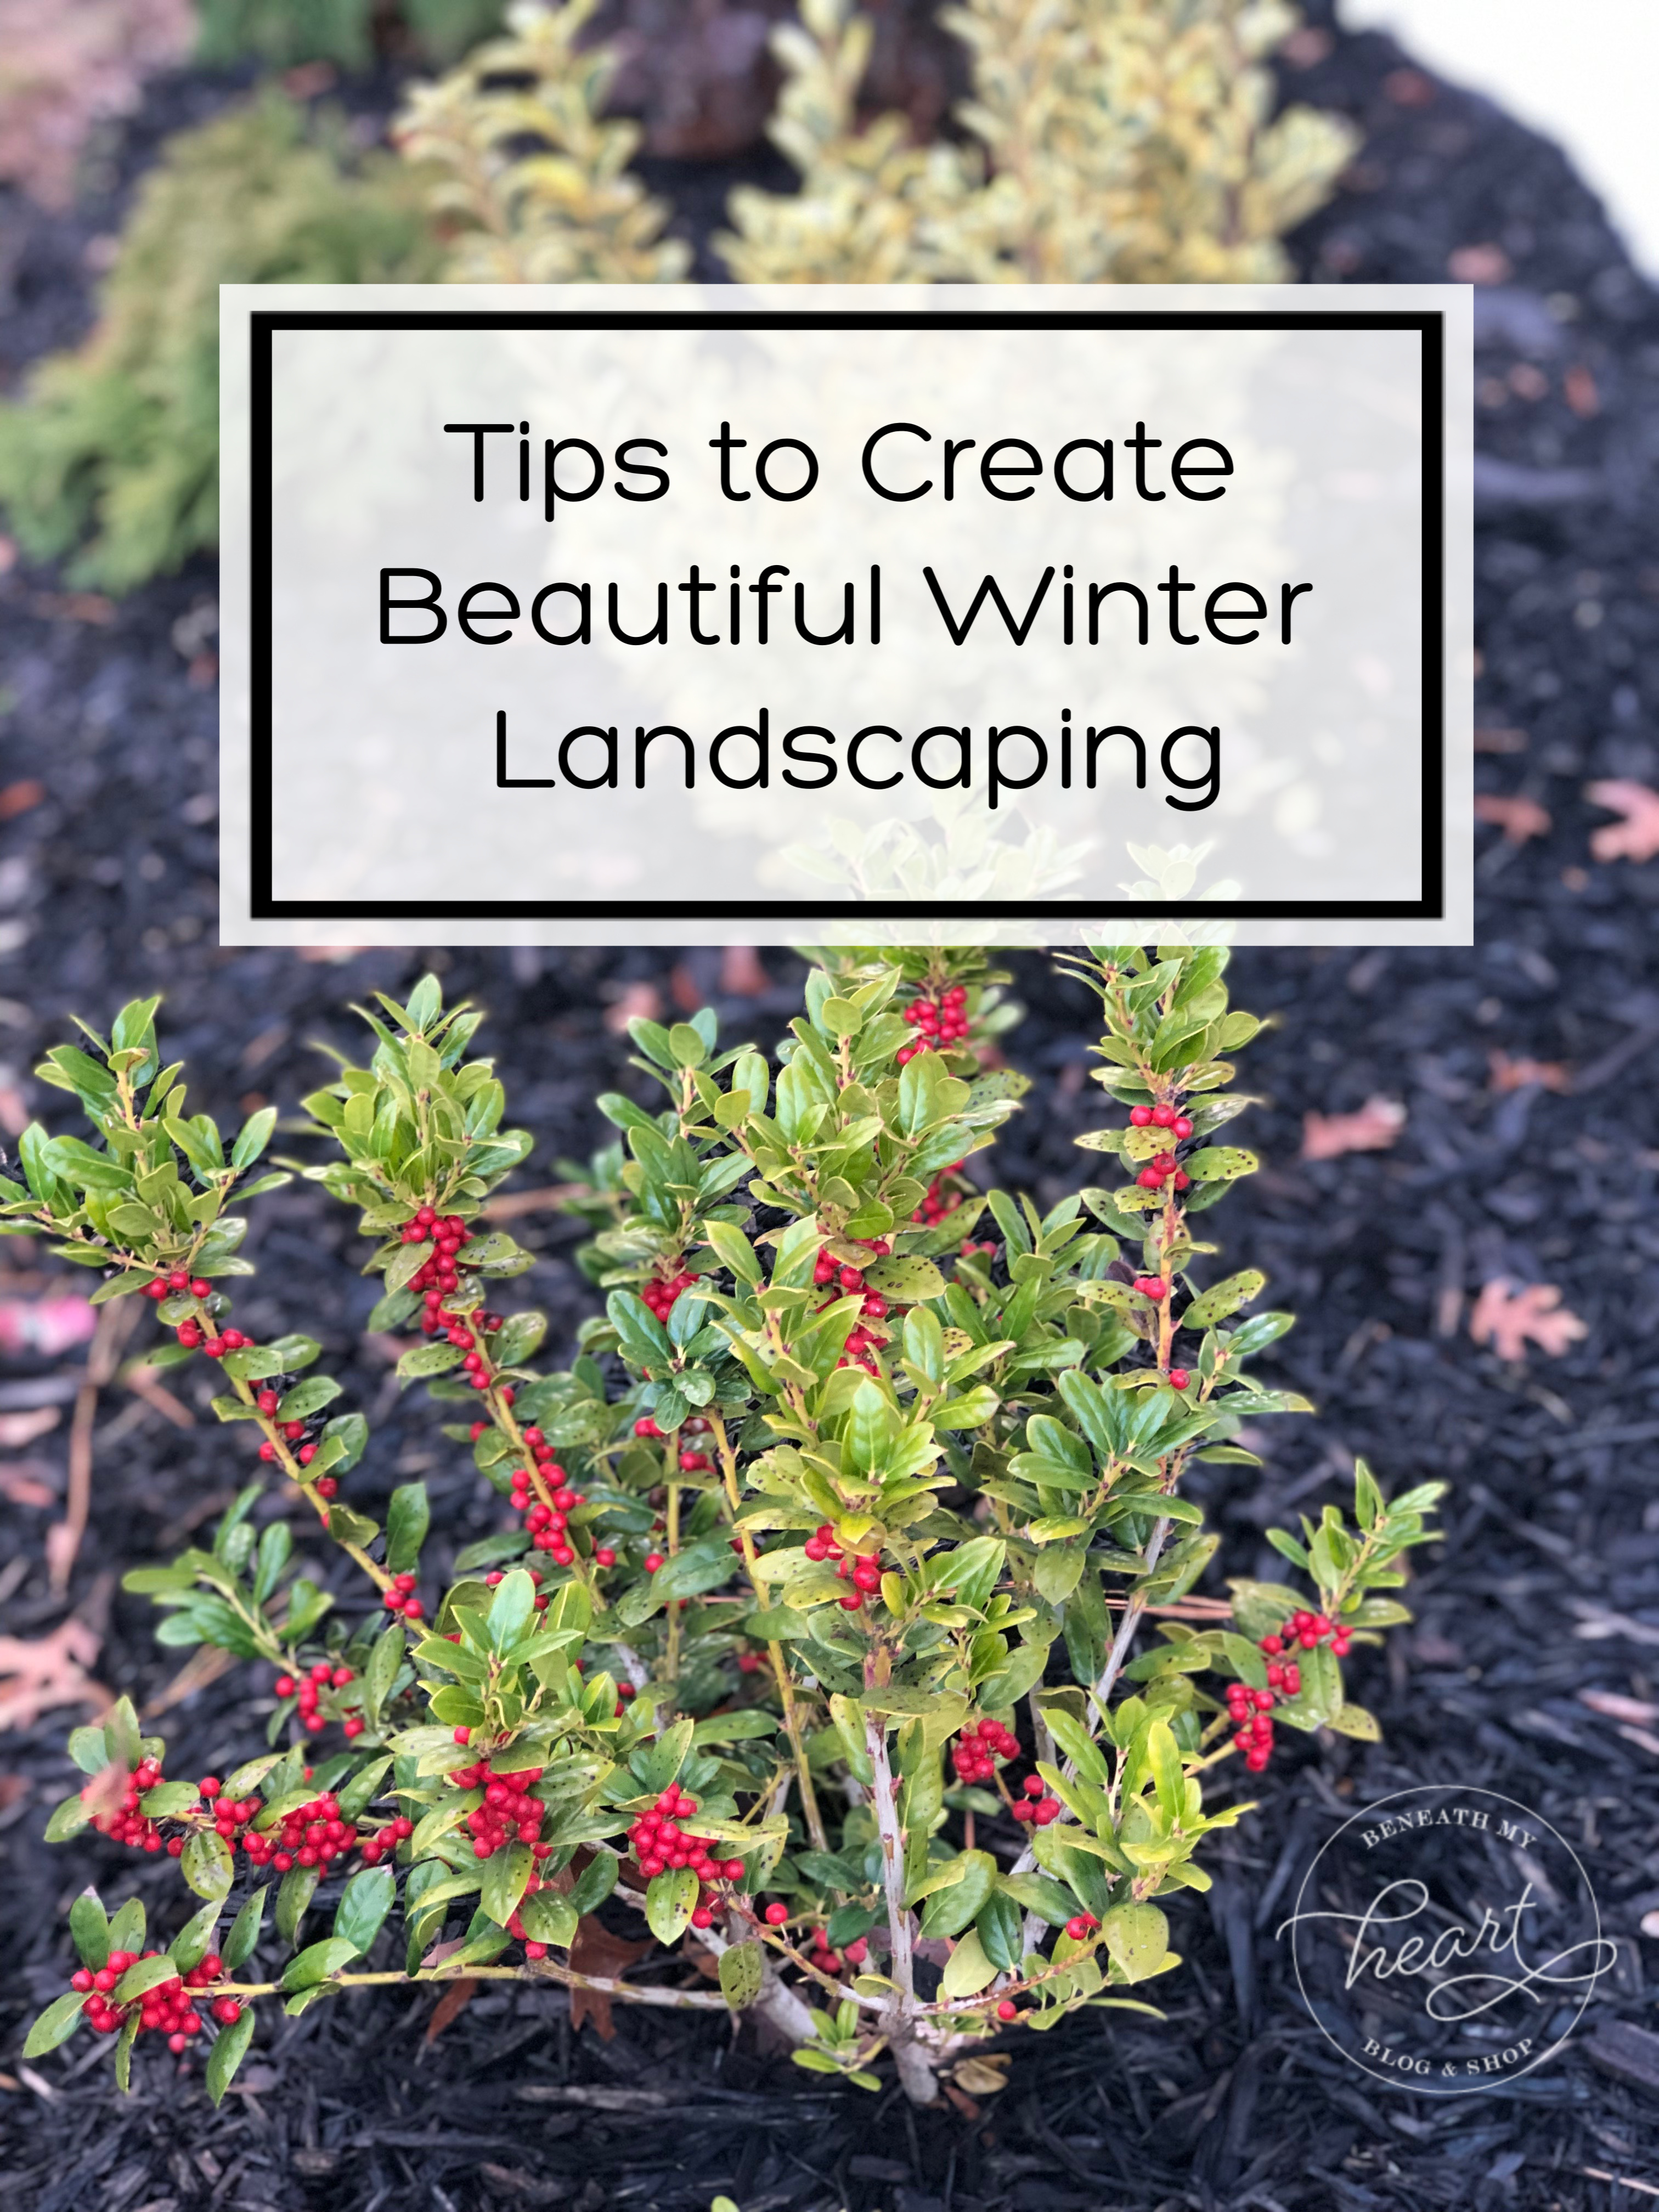 Tips to Create Beautiful Winter Landscaping